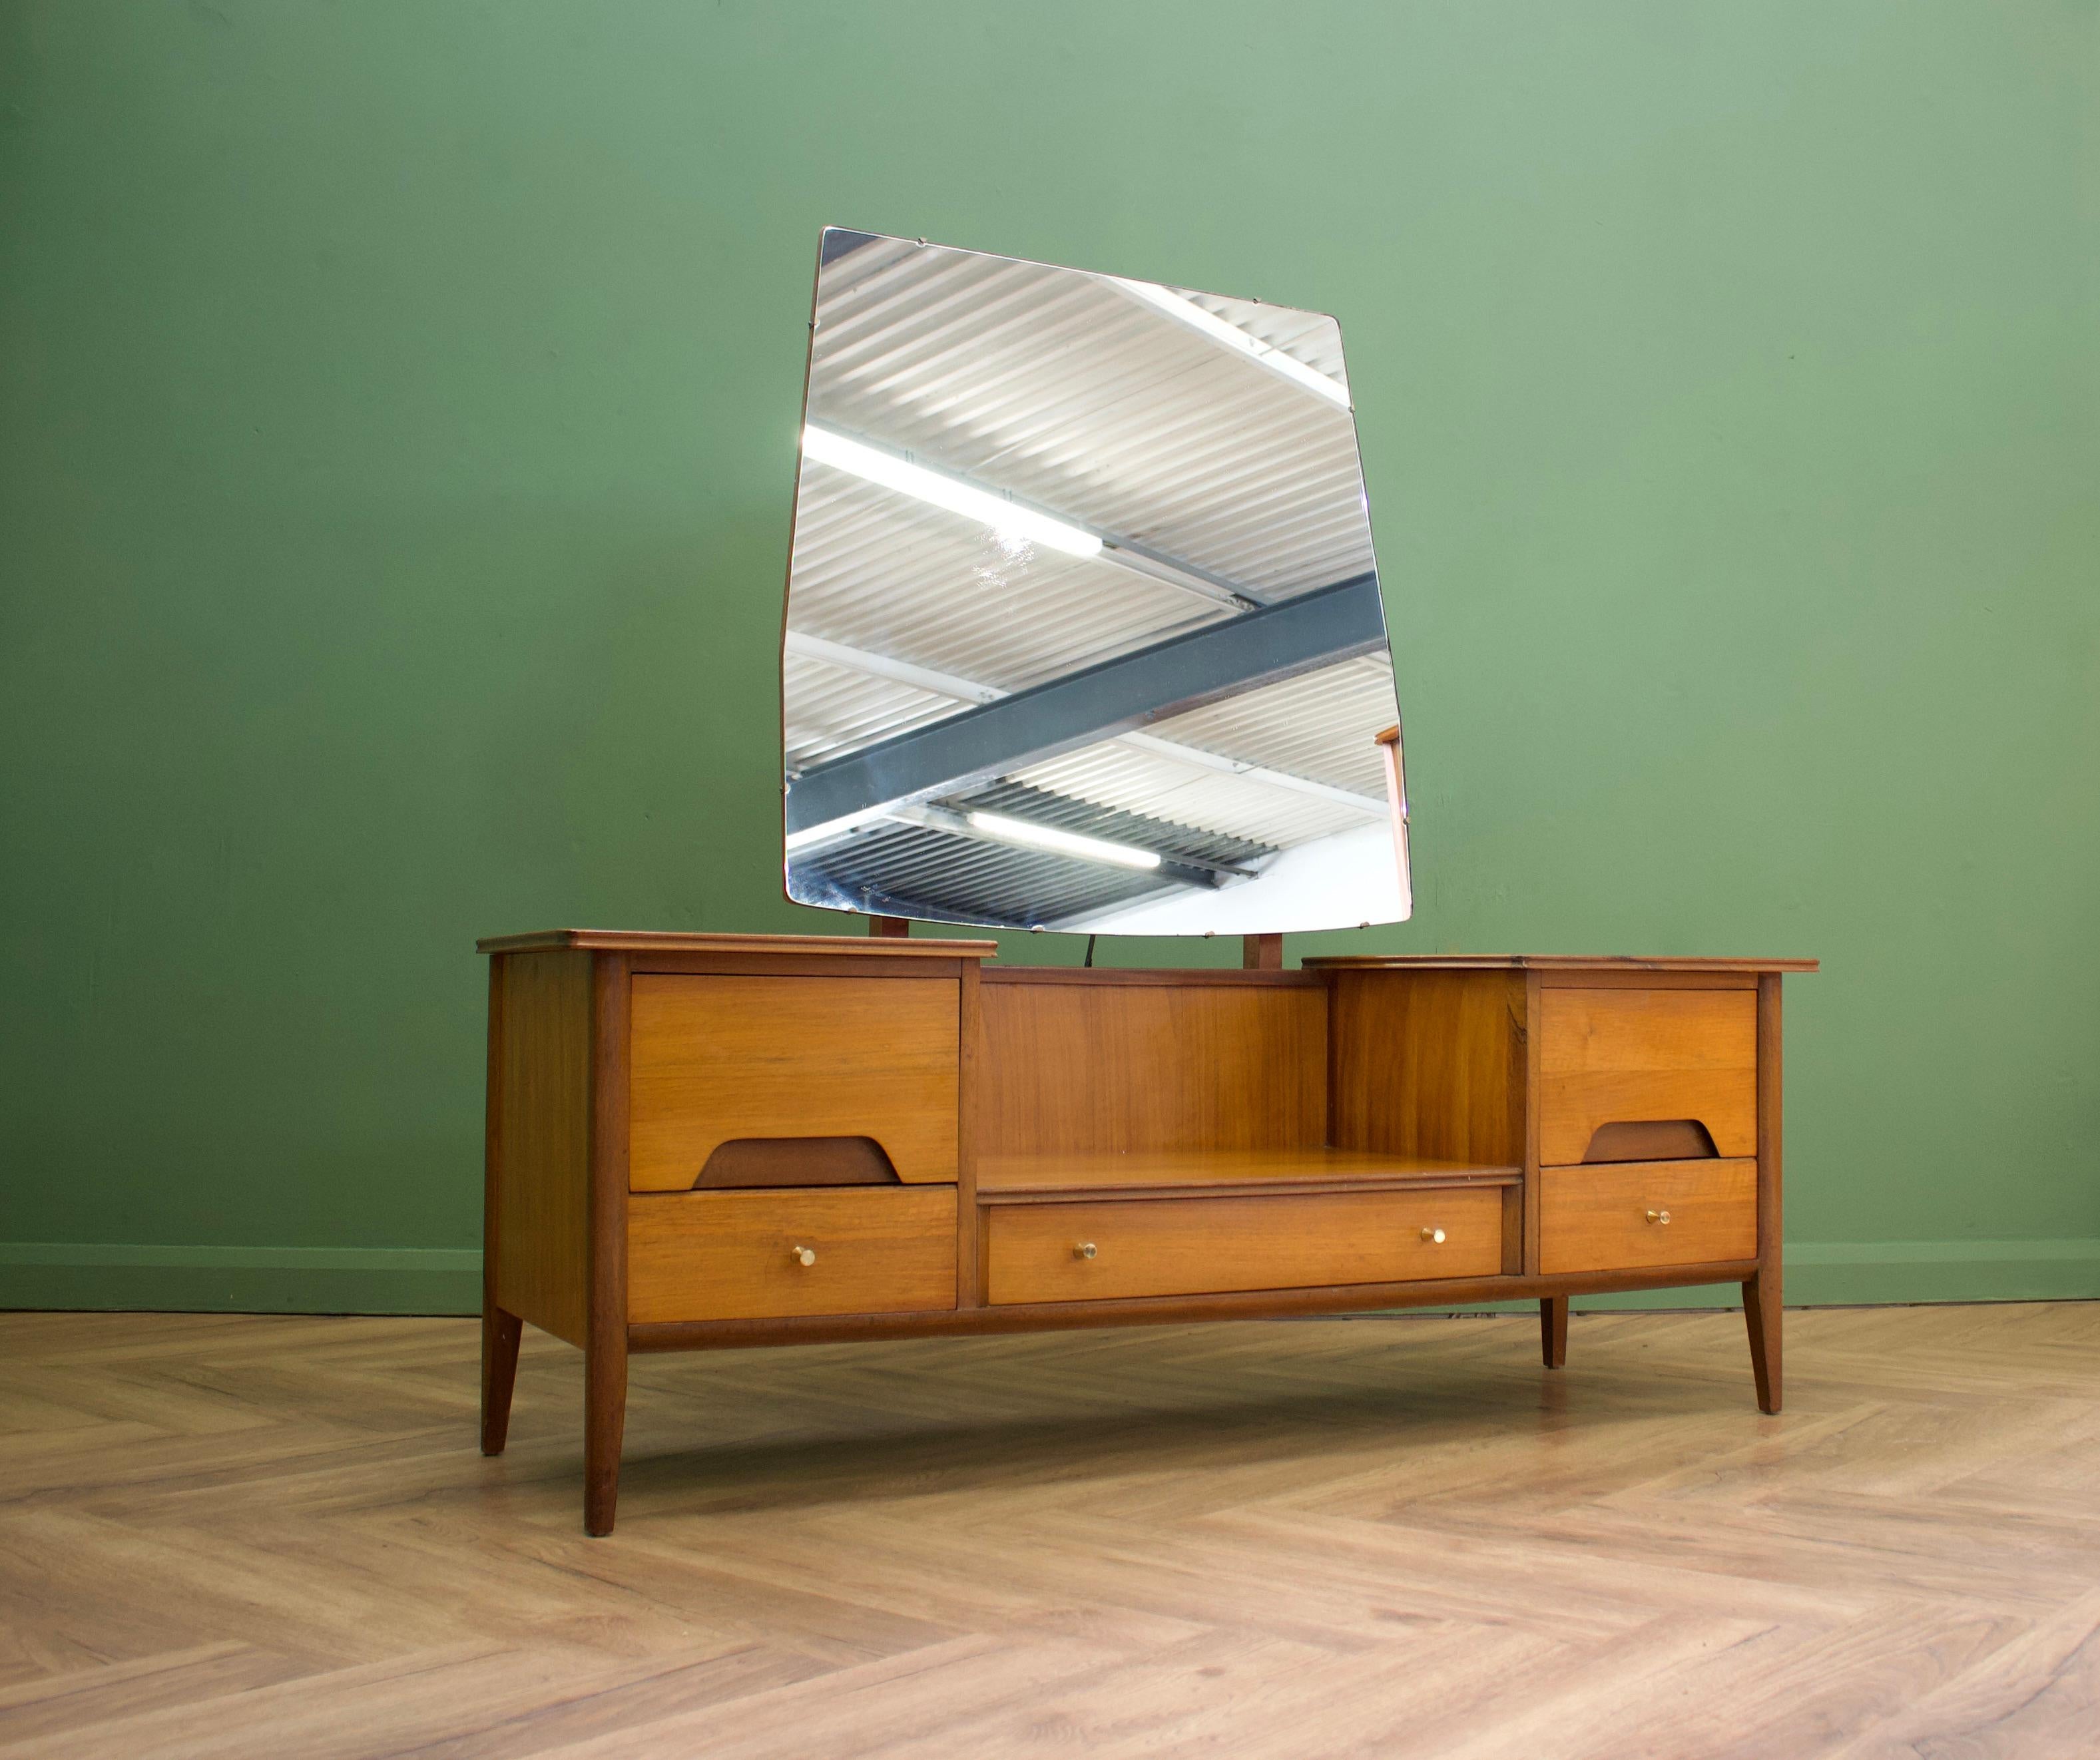 - Midcentury dressing table from Younger
- Manufactured in the UK.

- Made from walnut & walnut Veneer.

- Featuring 5 drawers 

- Height including mirror is 141cm.